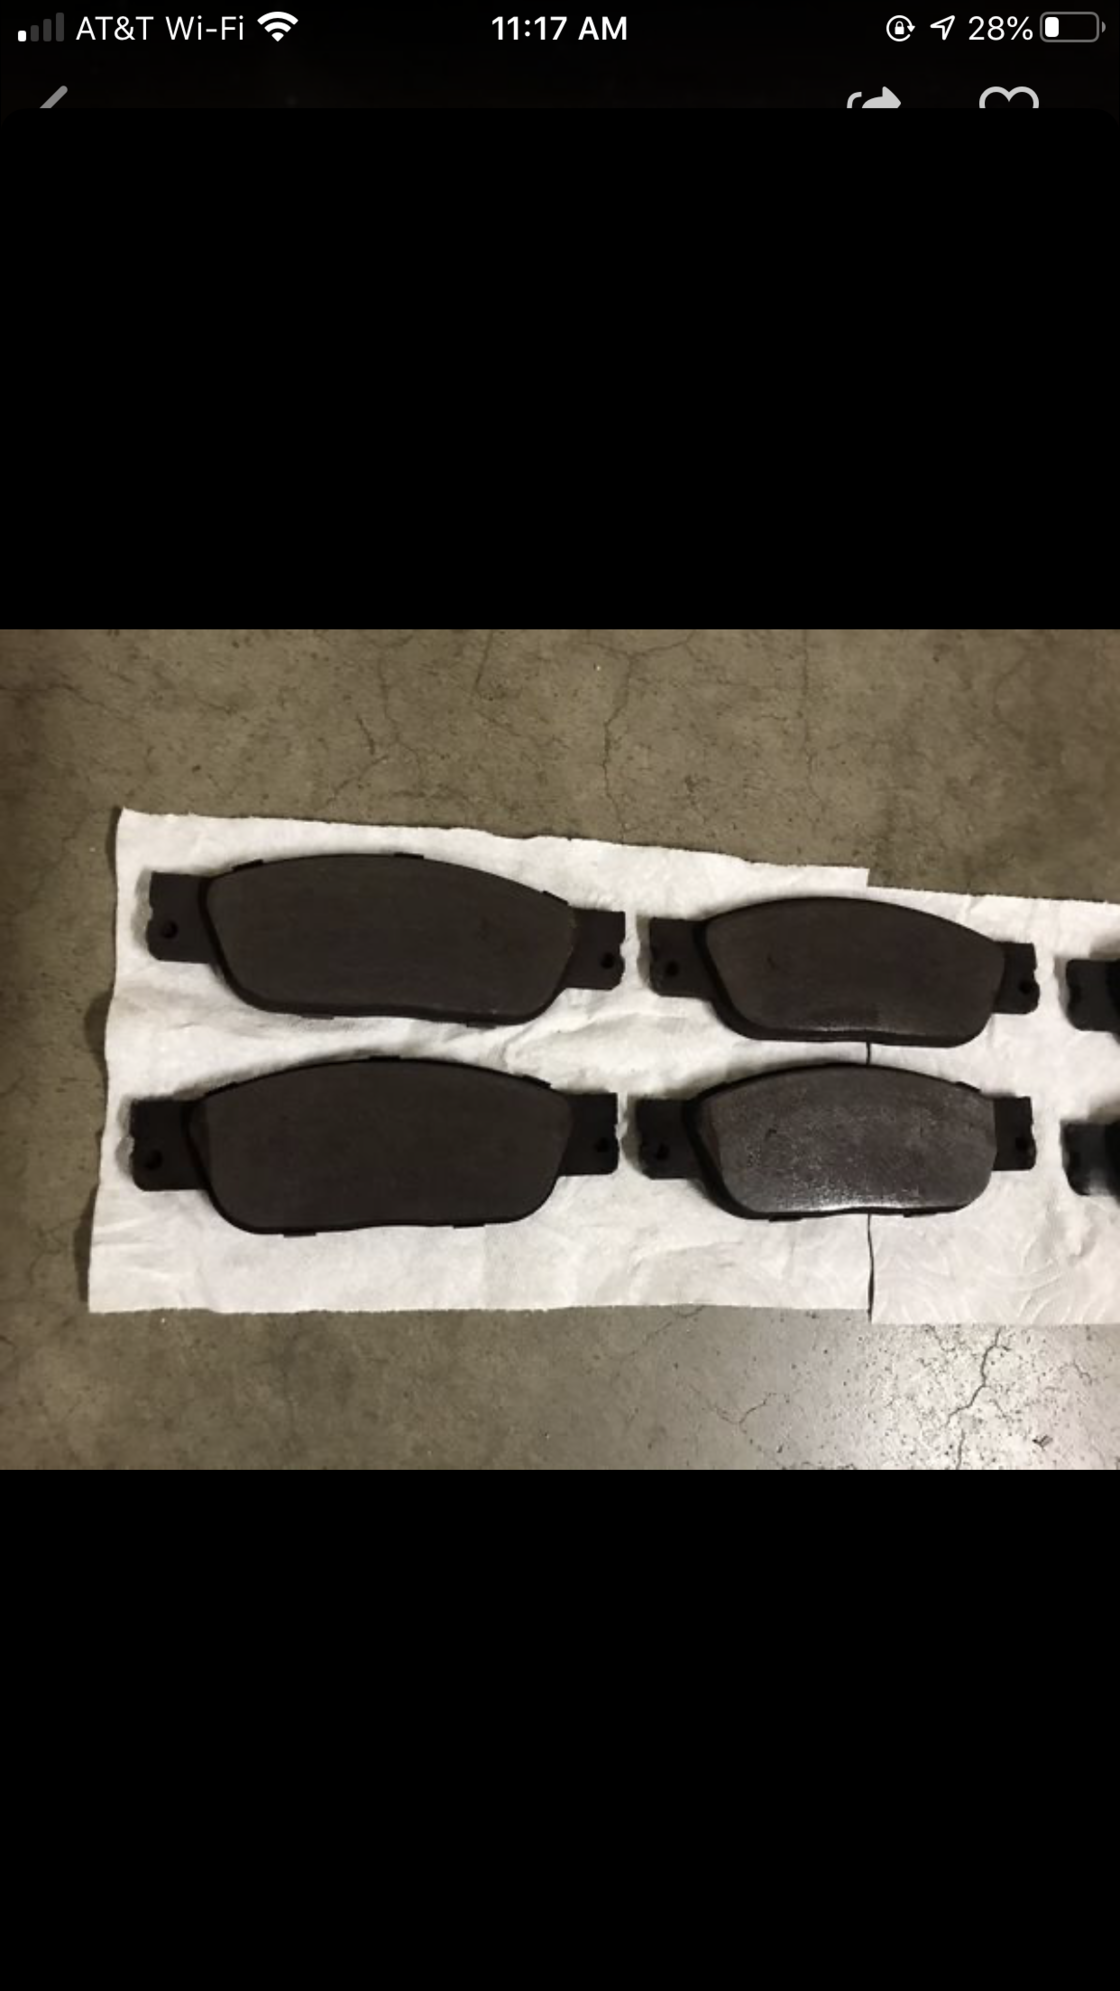 Brakes - FREE - 2 used sets of brakes for Jaguar S-Type - Used - 2001 to 2008 Jaguar S-Type - Montclair, CA 91762, United States